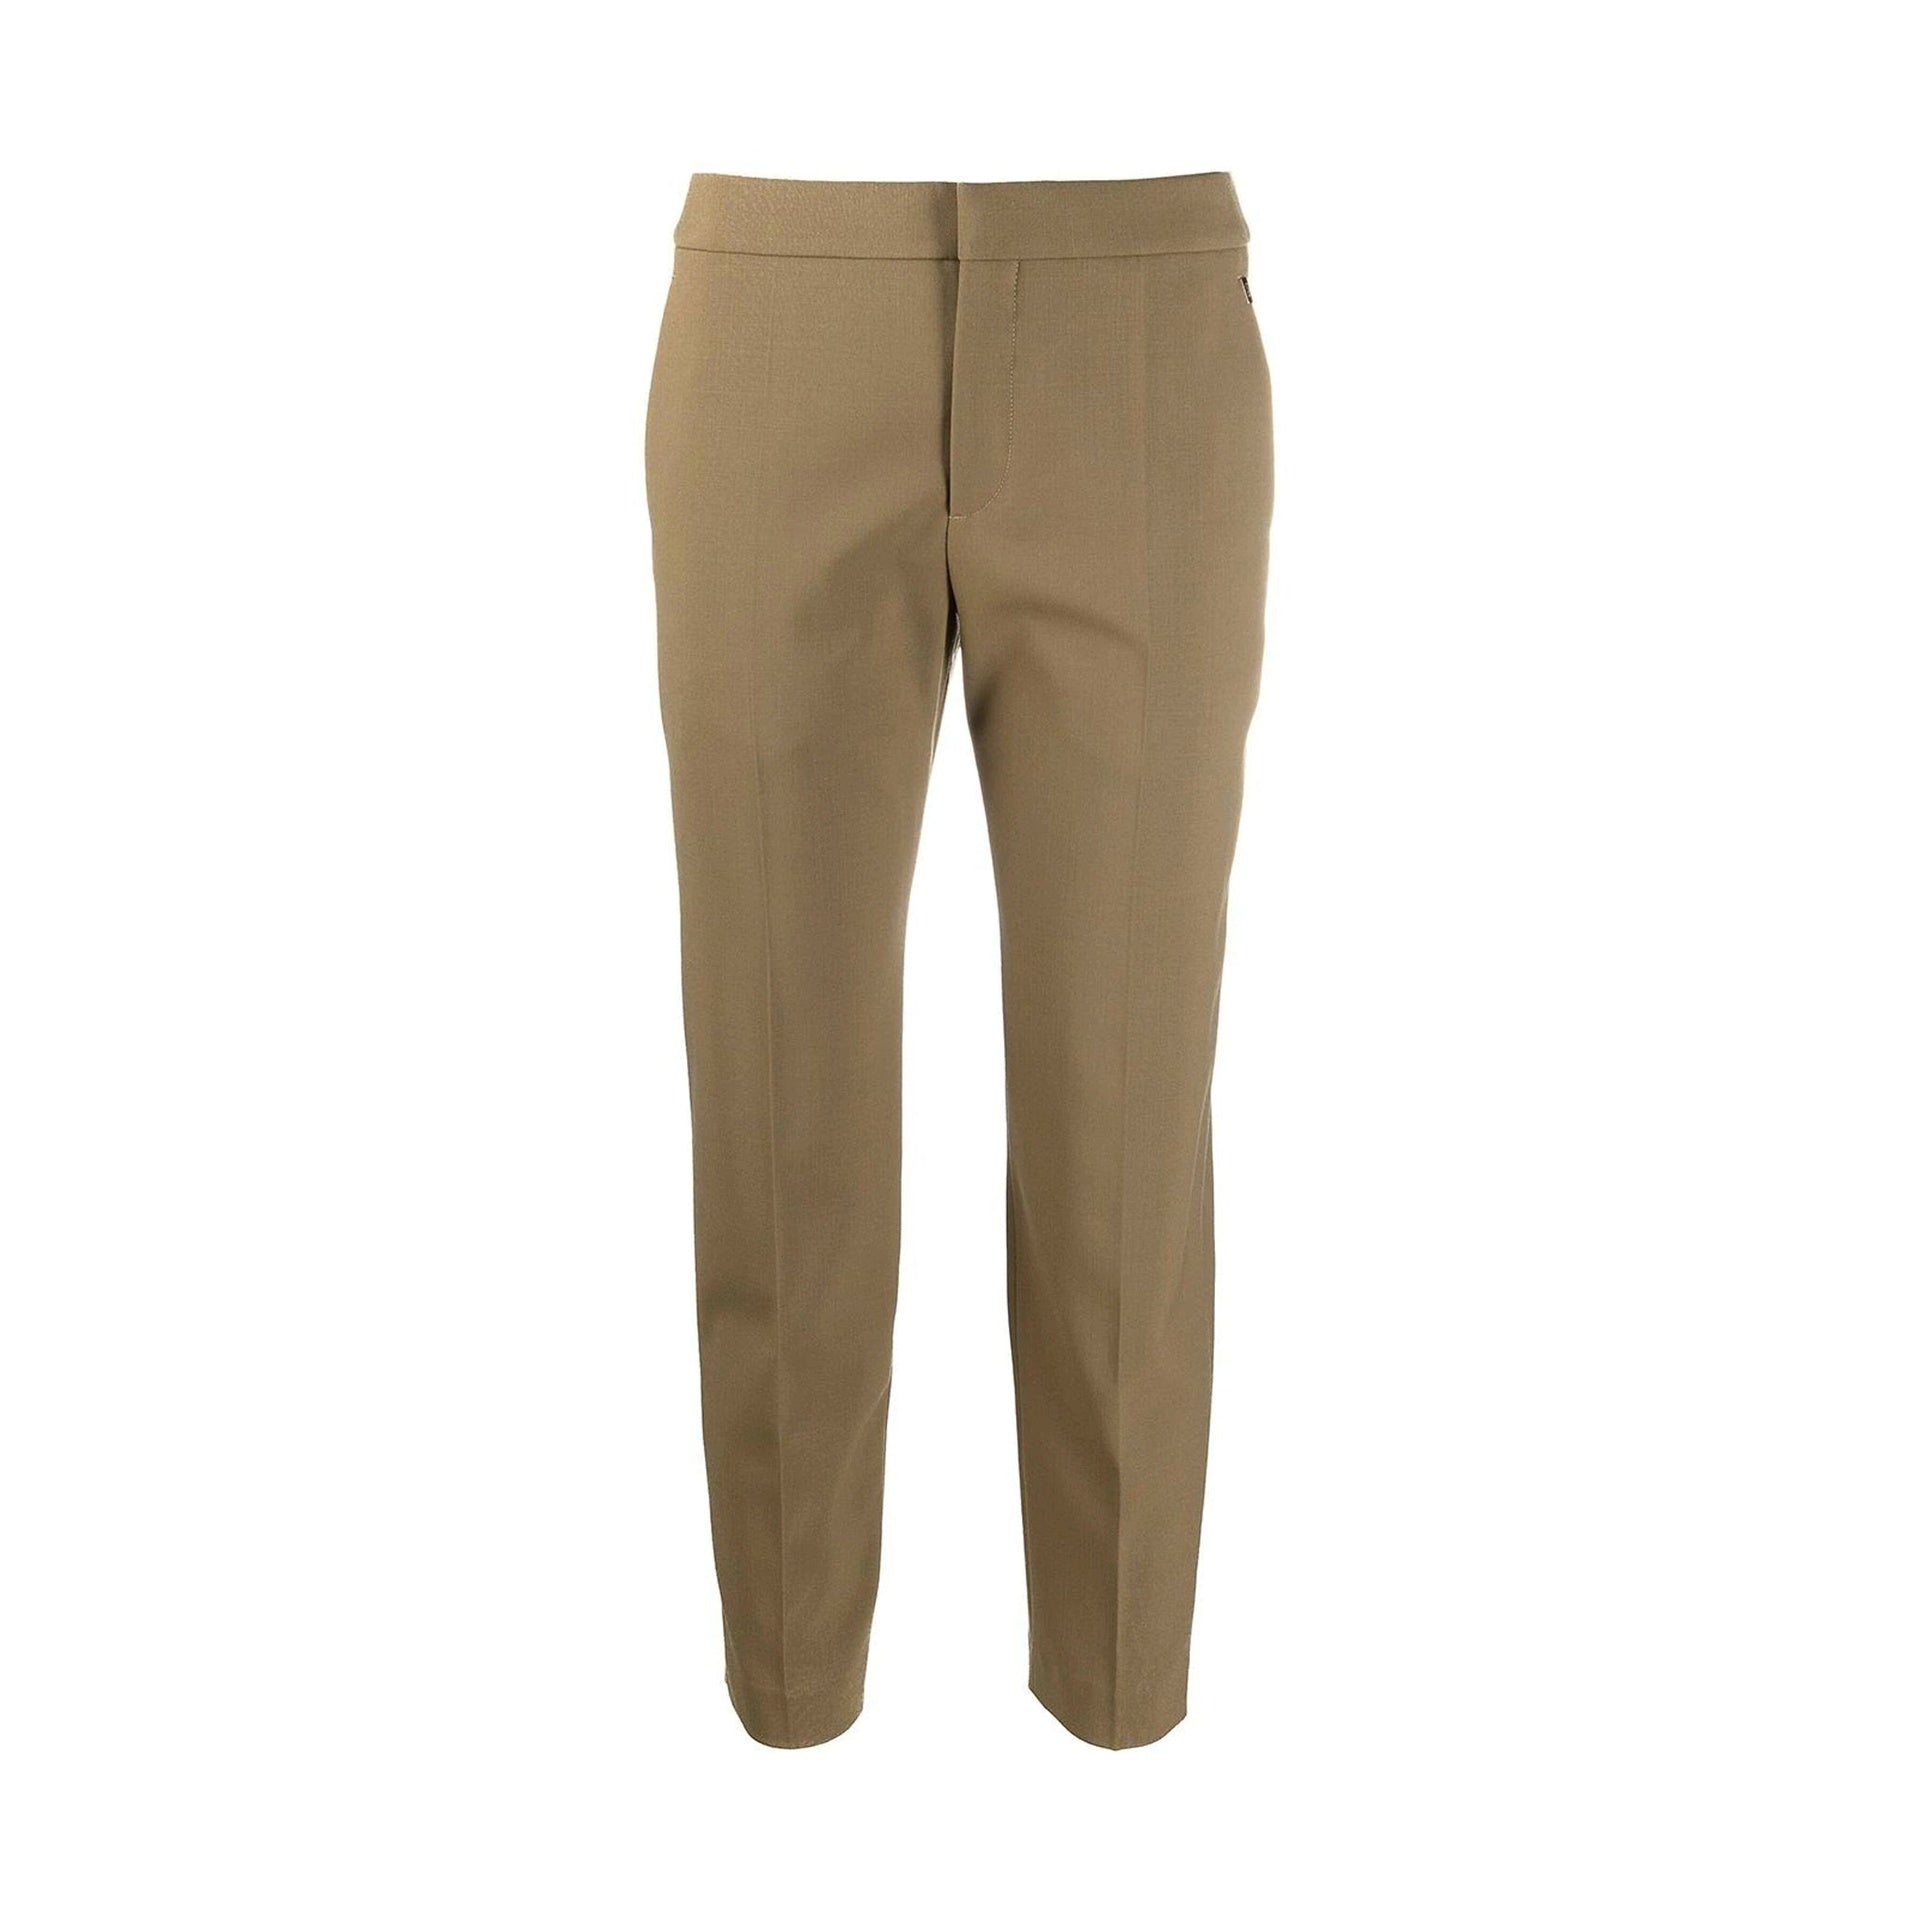 CHLOE-OUTLET-SALE-Chloe-Cropped-Tailored-Trousers-Hosen-BROWN-40-ARCHIVE-COLLECTION.jpg